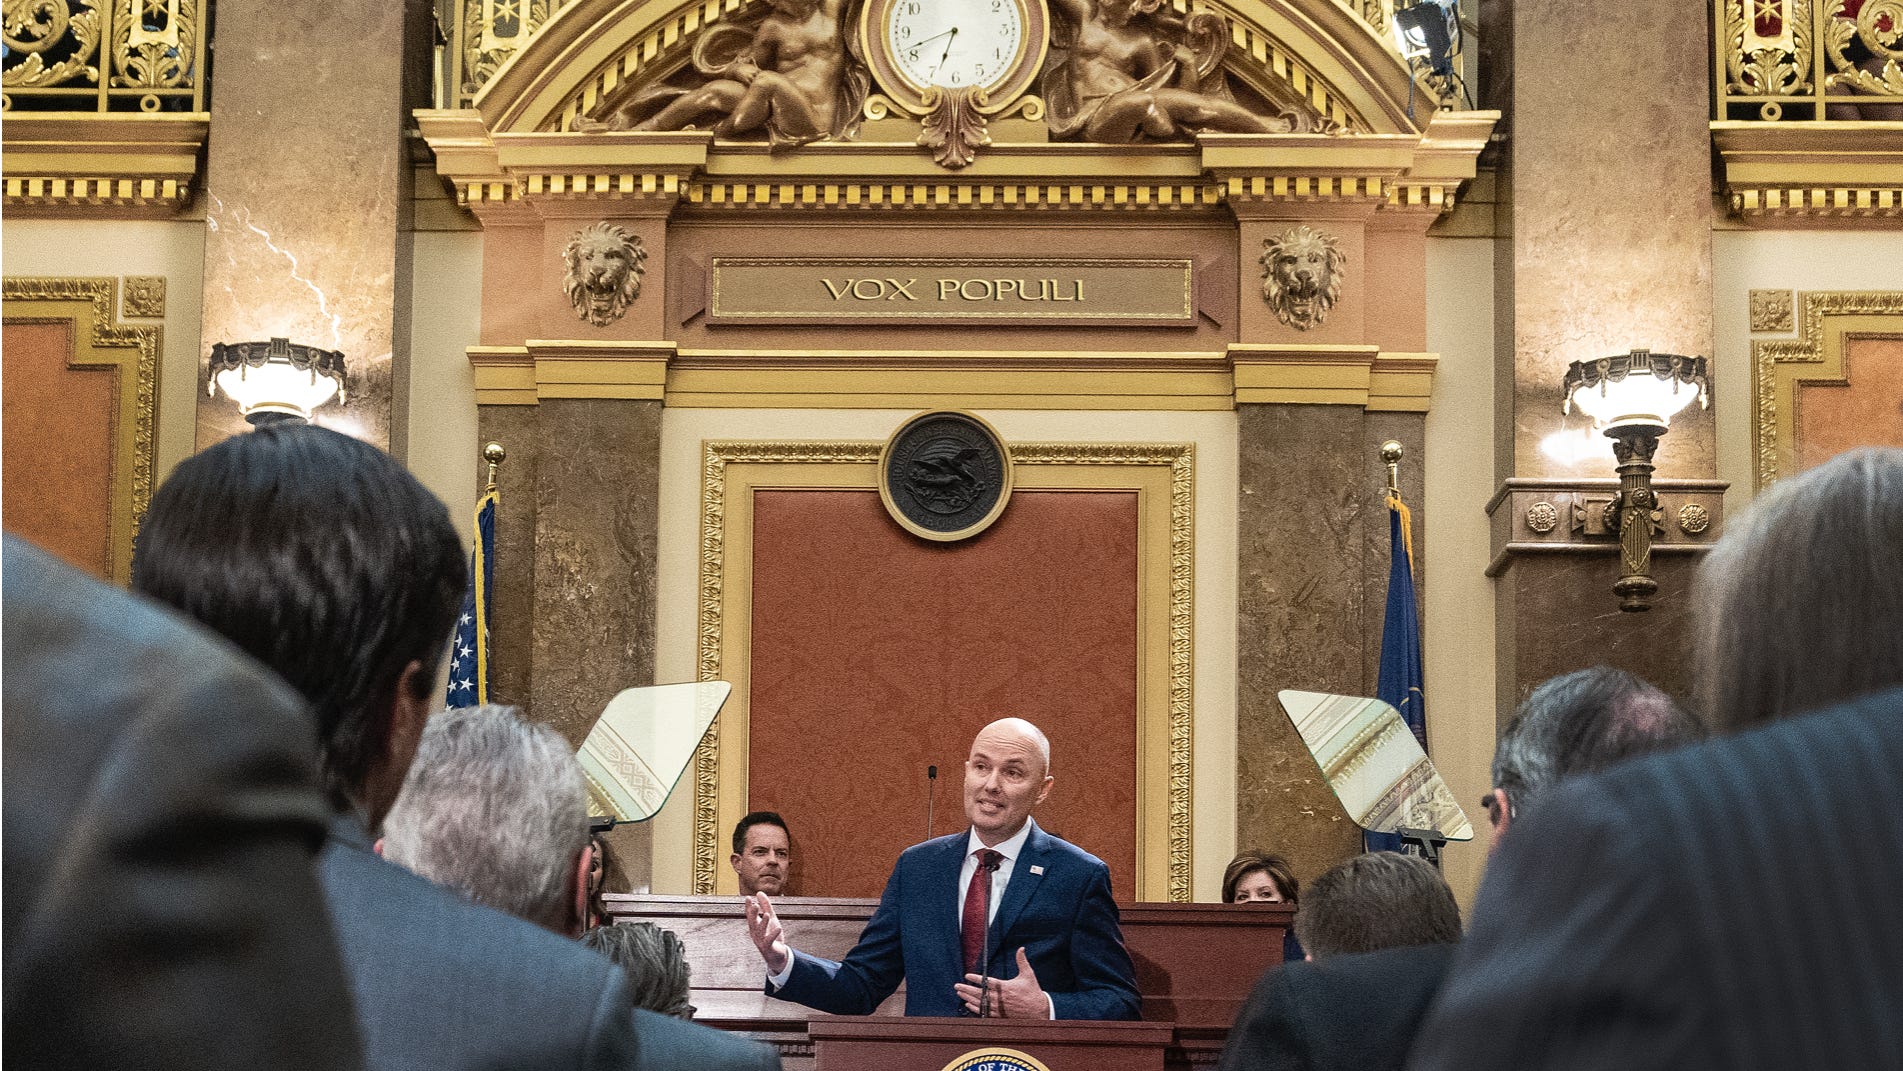 Gov. Cox speaks on taxes, housing, water and hope in his state of the state address - The Spectrum